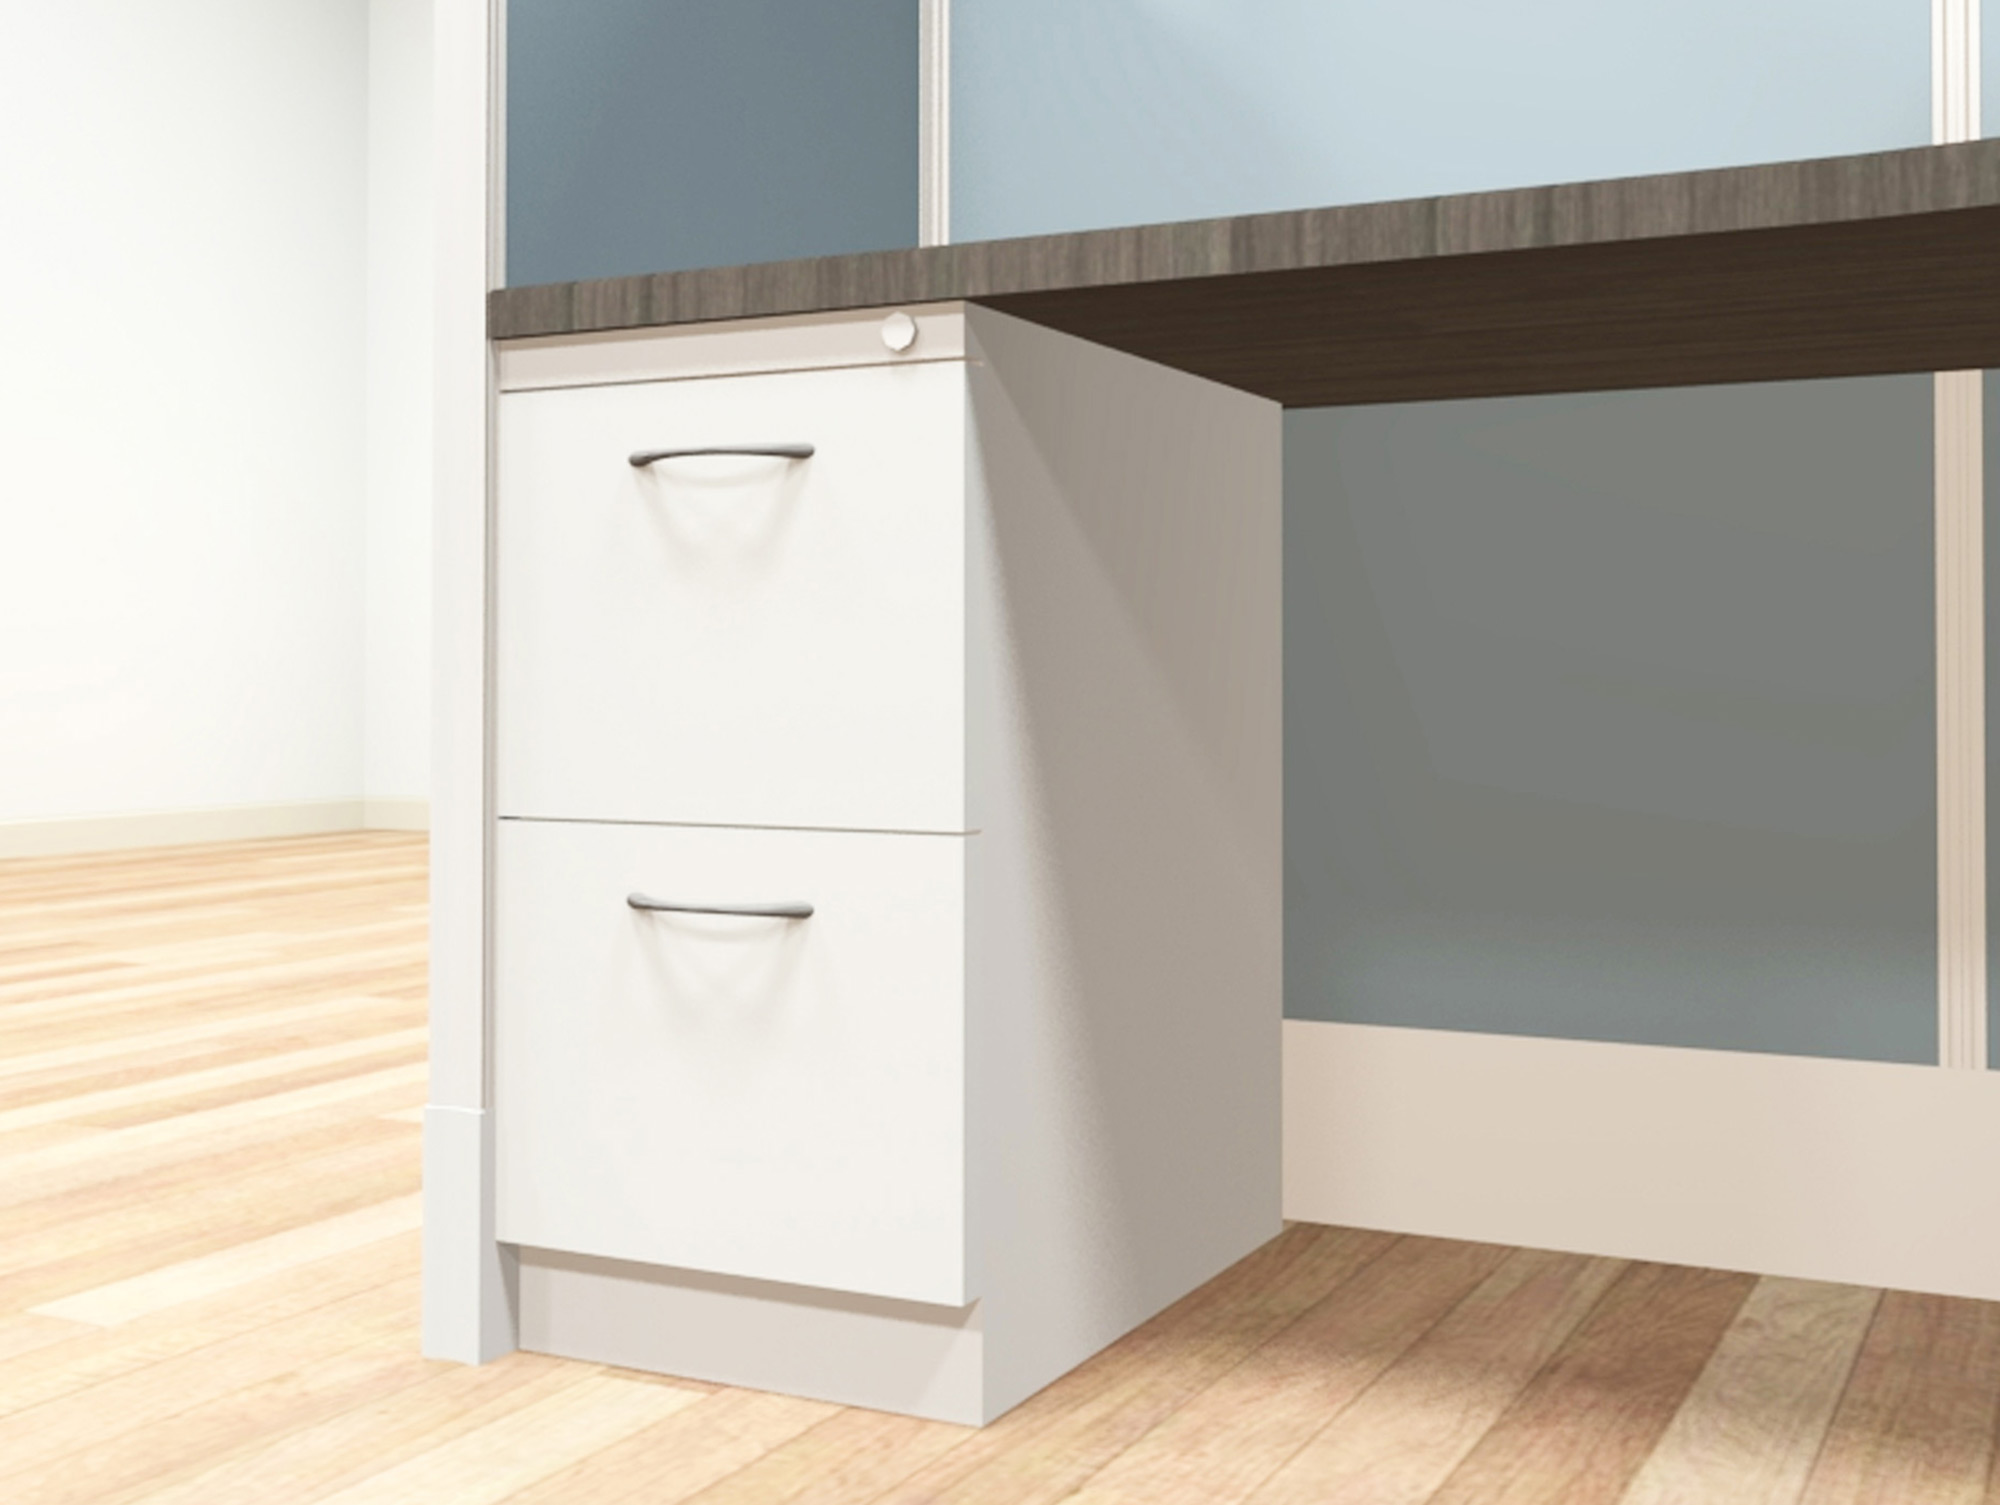 5x6 modular workstations from AIS - a ï¿½file-fileï¿½ pedestal is an under-surface storage cabinet with two deep drawers designed for hanging files. Lock and key secures all drawers from unwanted visitors.